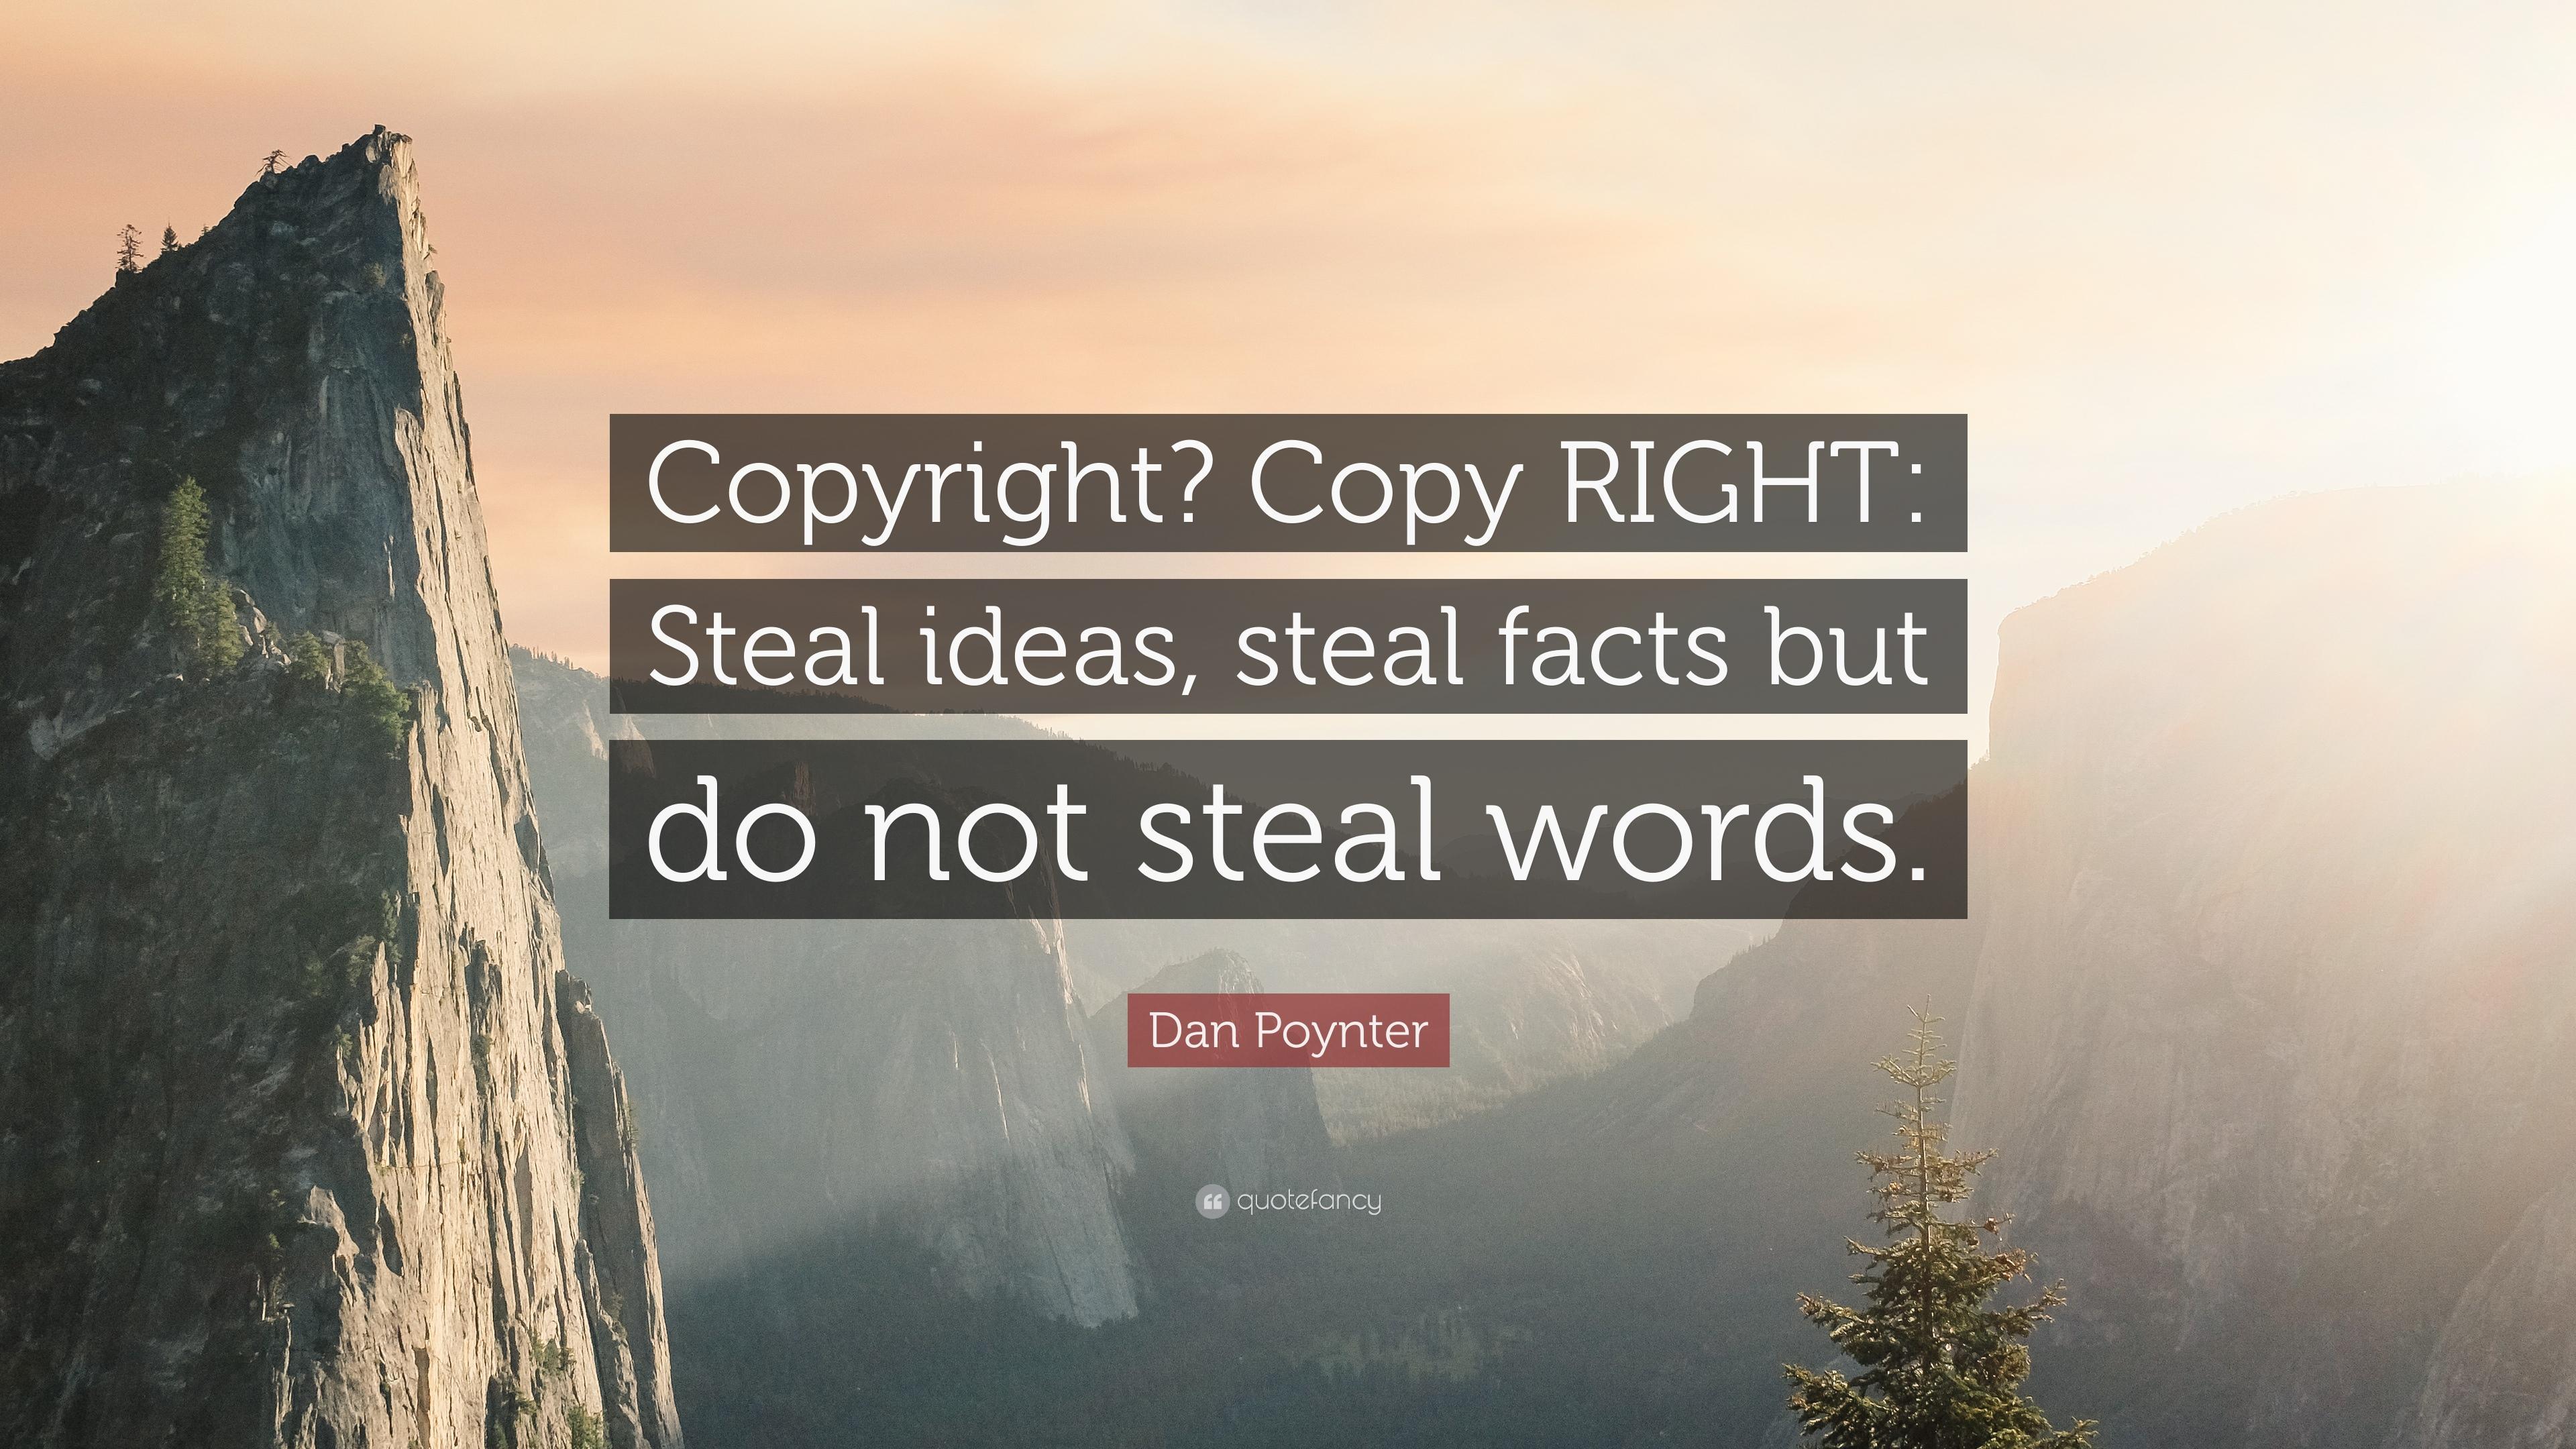 Dan Poynter Quote: “Copyright? Copy RIGHT: Steal ideas, steal facts